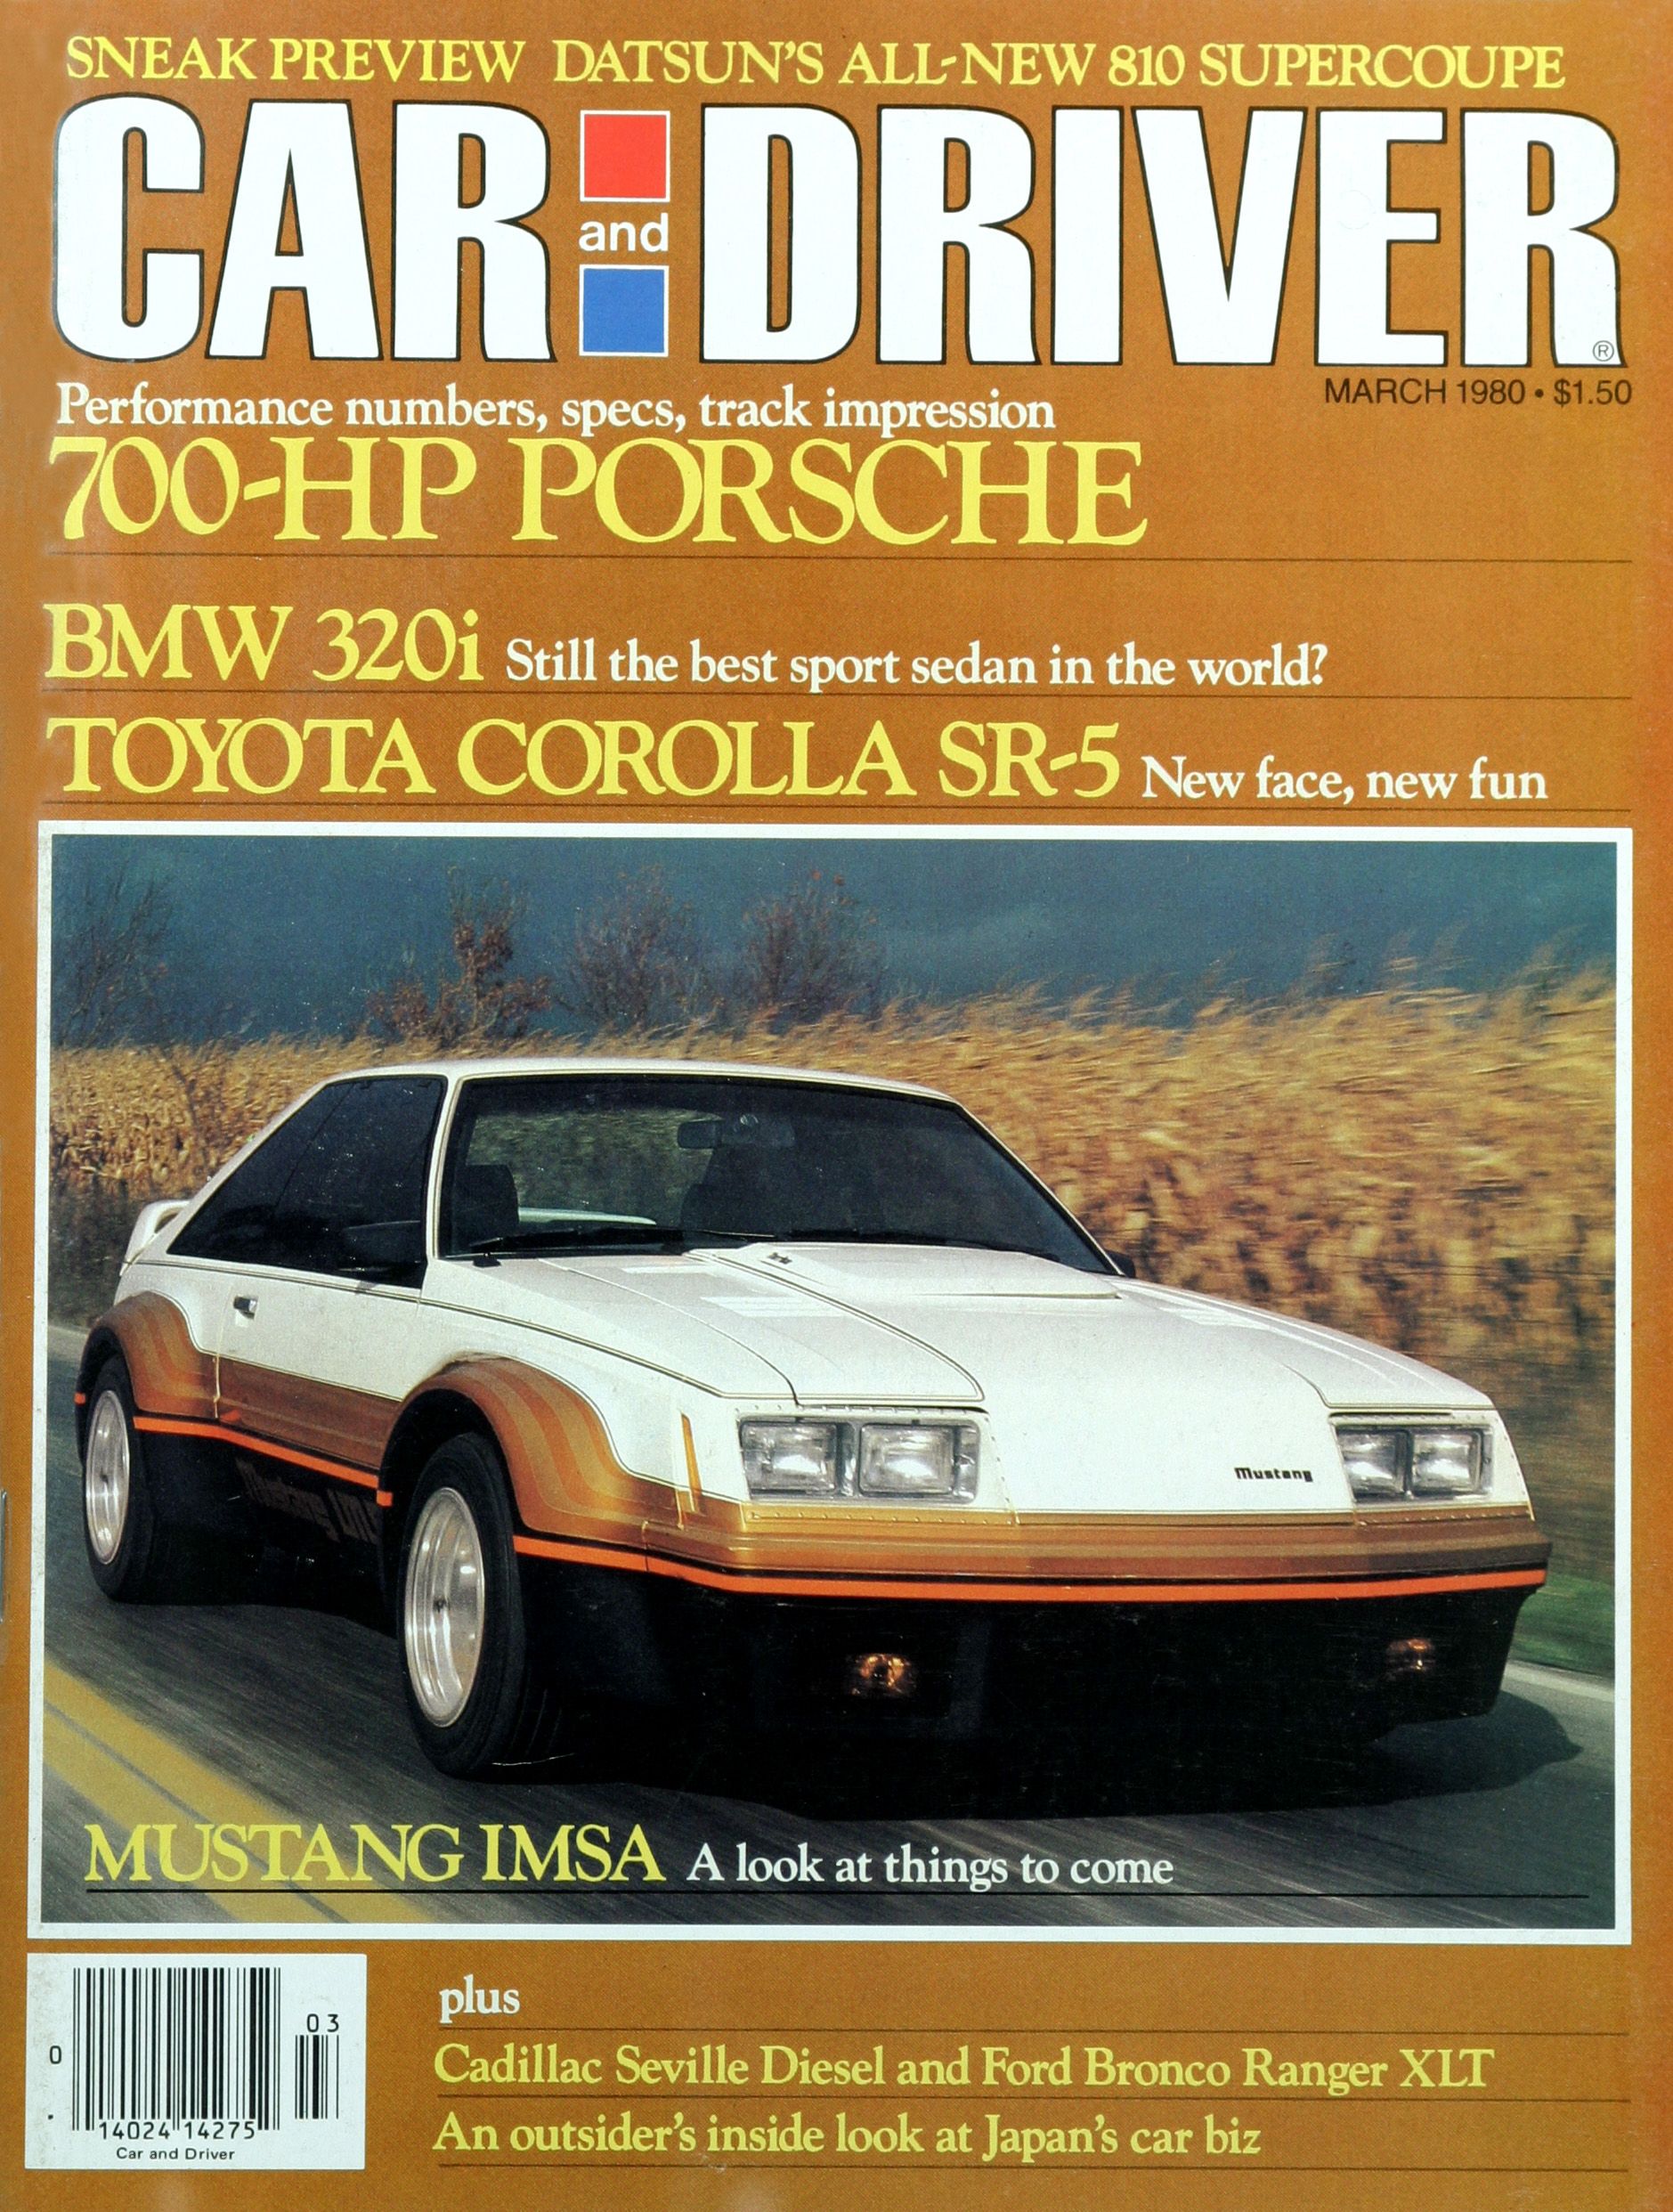 Like, Totally Rad: The Car and Driver Covers of the 1980s